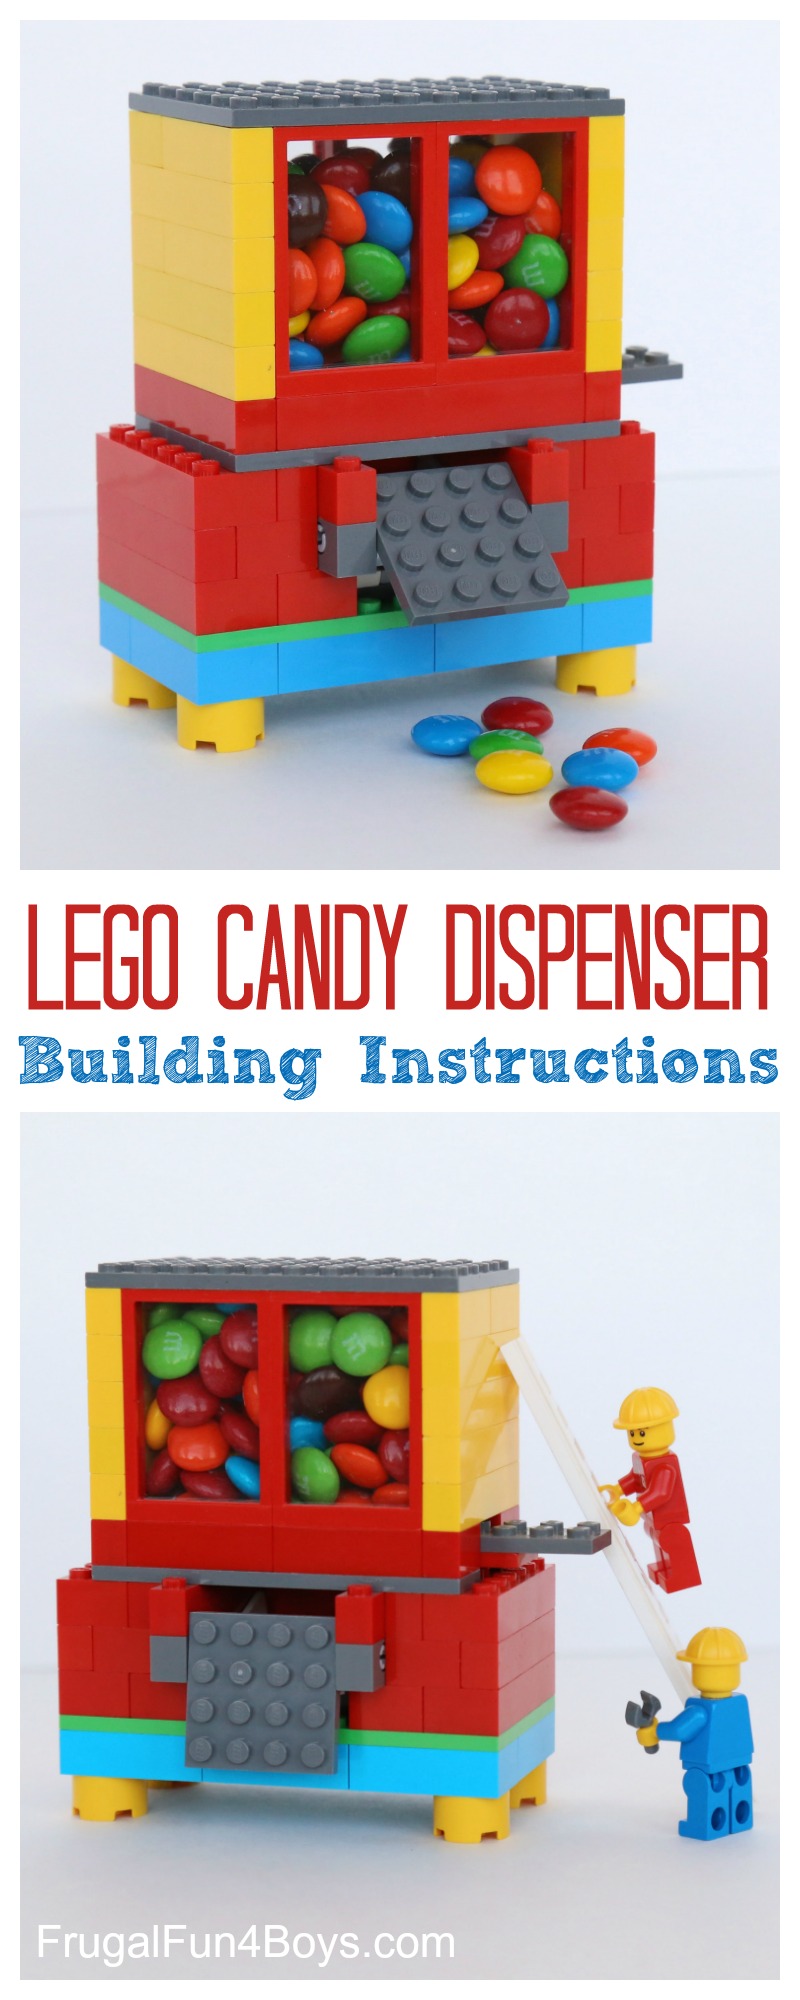  LEGO Candy Dispenser Building Instructions